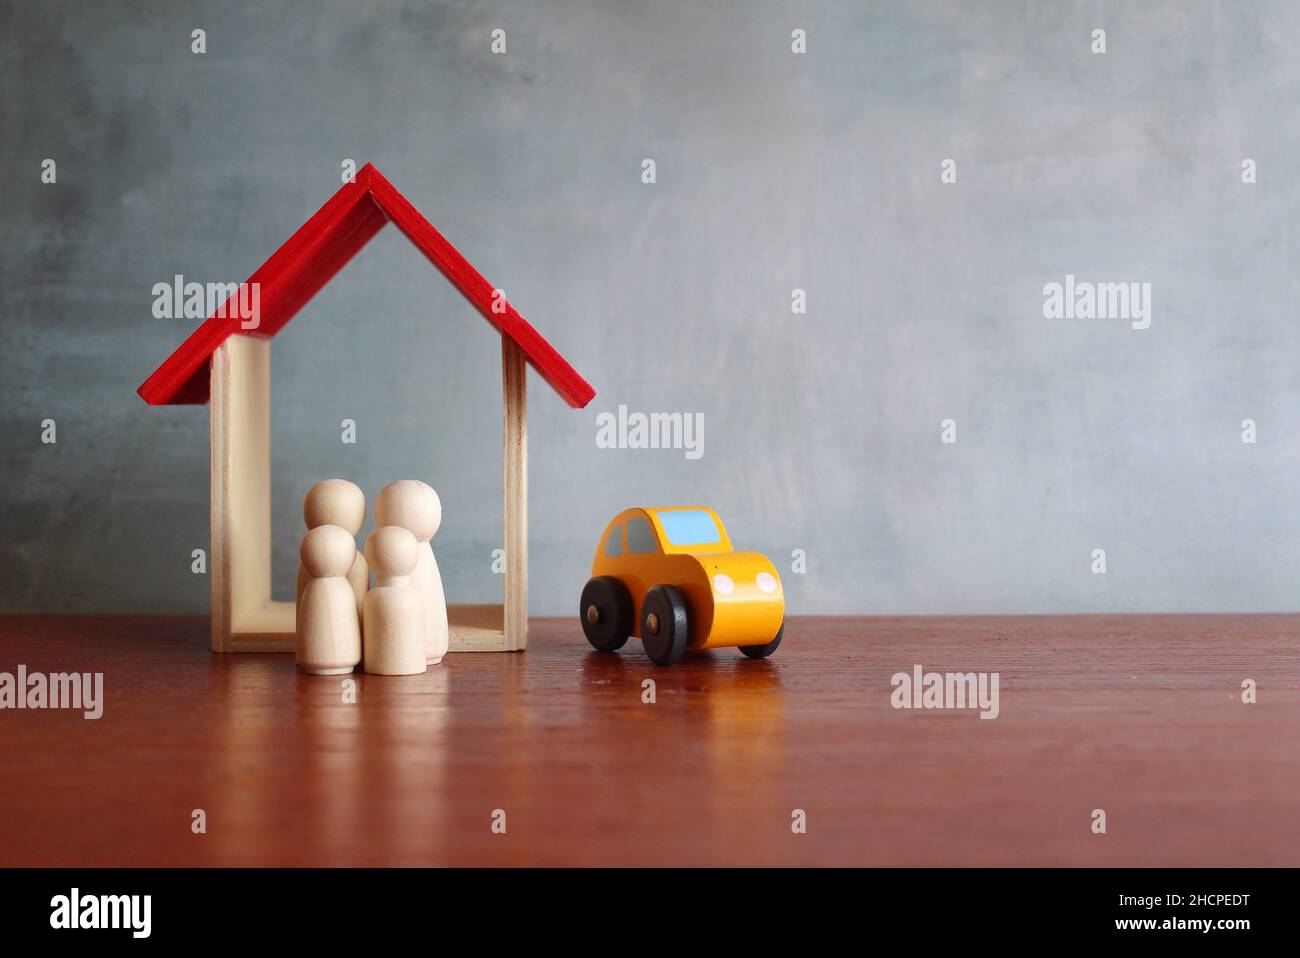 Family planning and property concept. Close up image of wooden toy house, car and dolls. Stock Photo